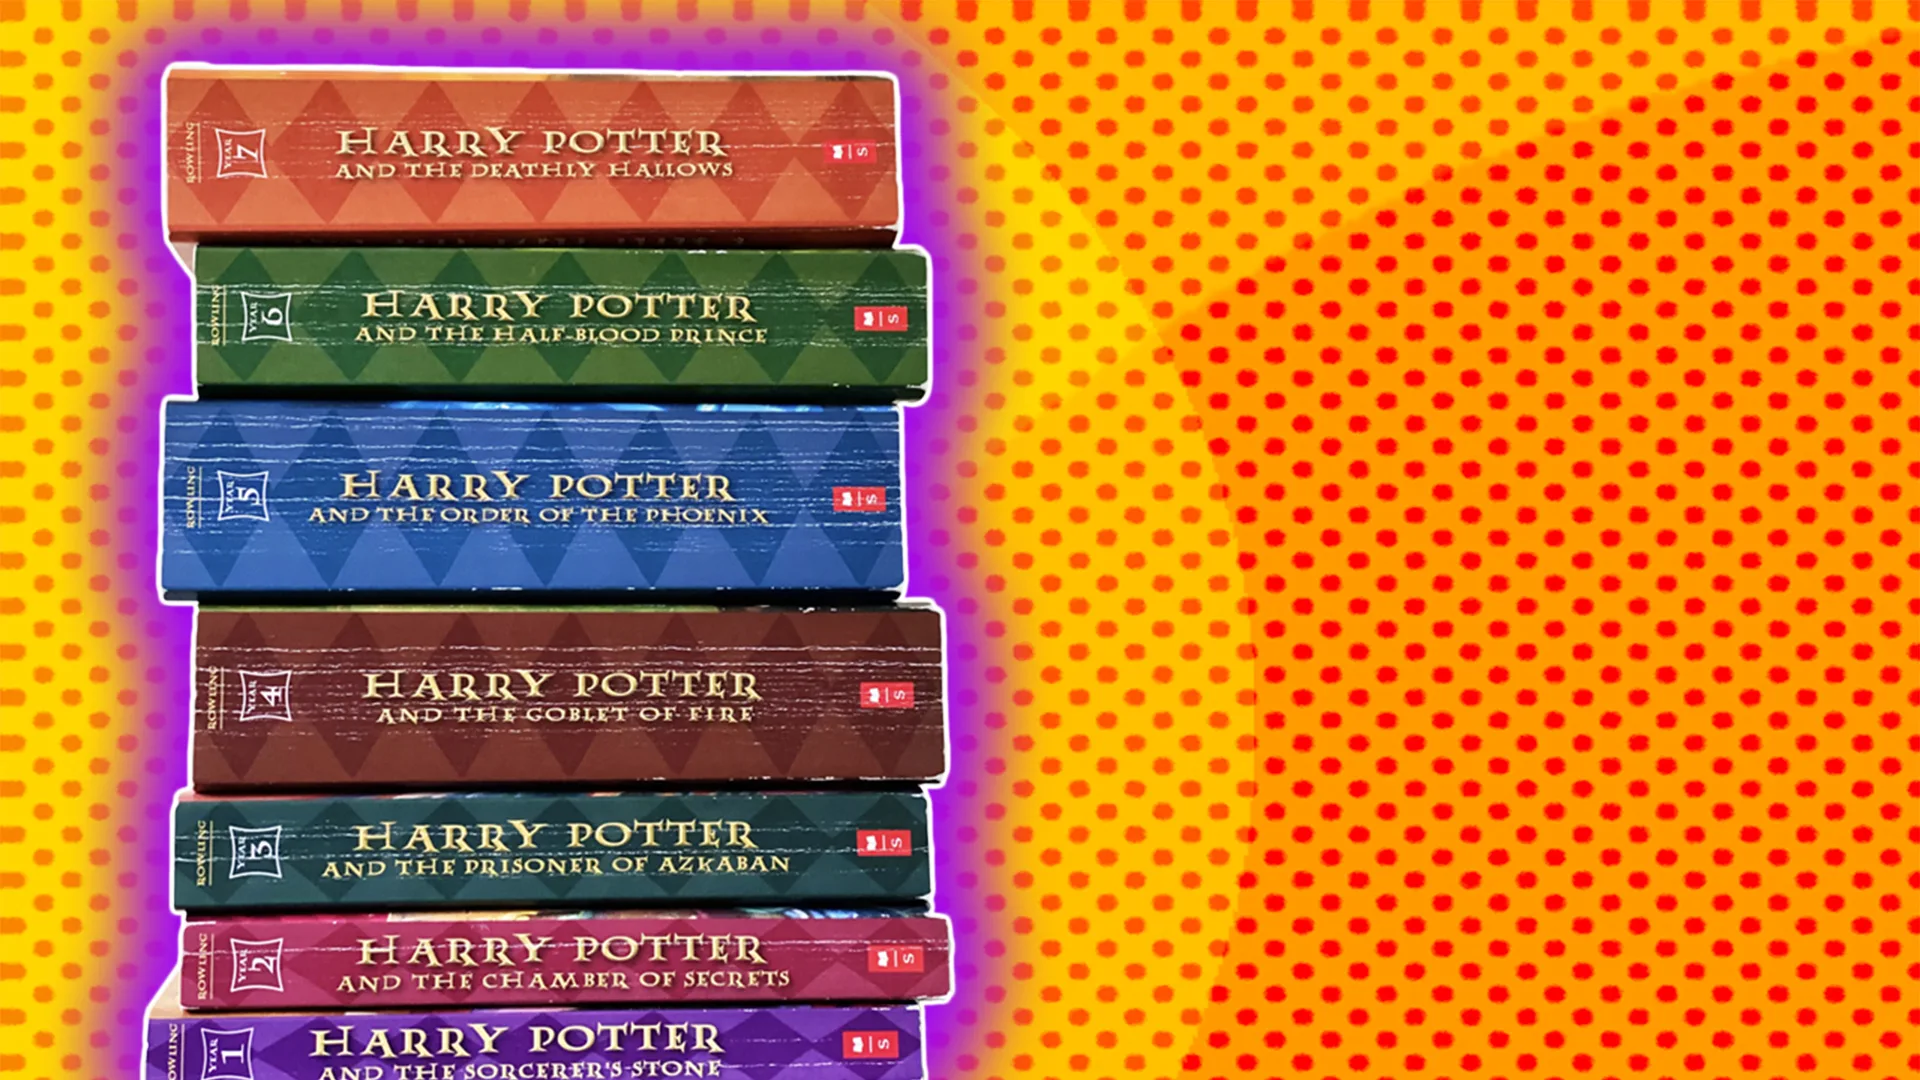 Harry Potter books in a pile - in graphic house style